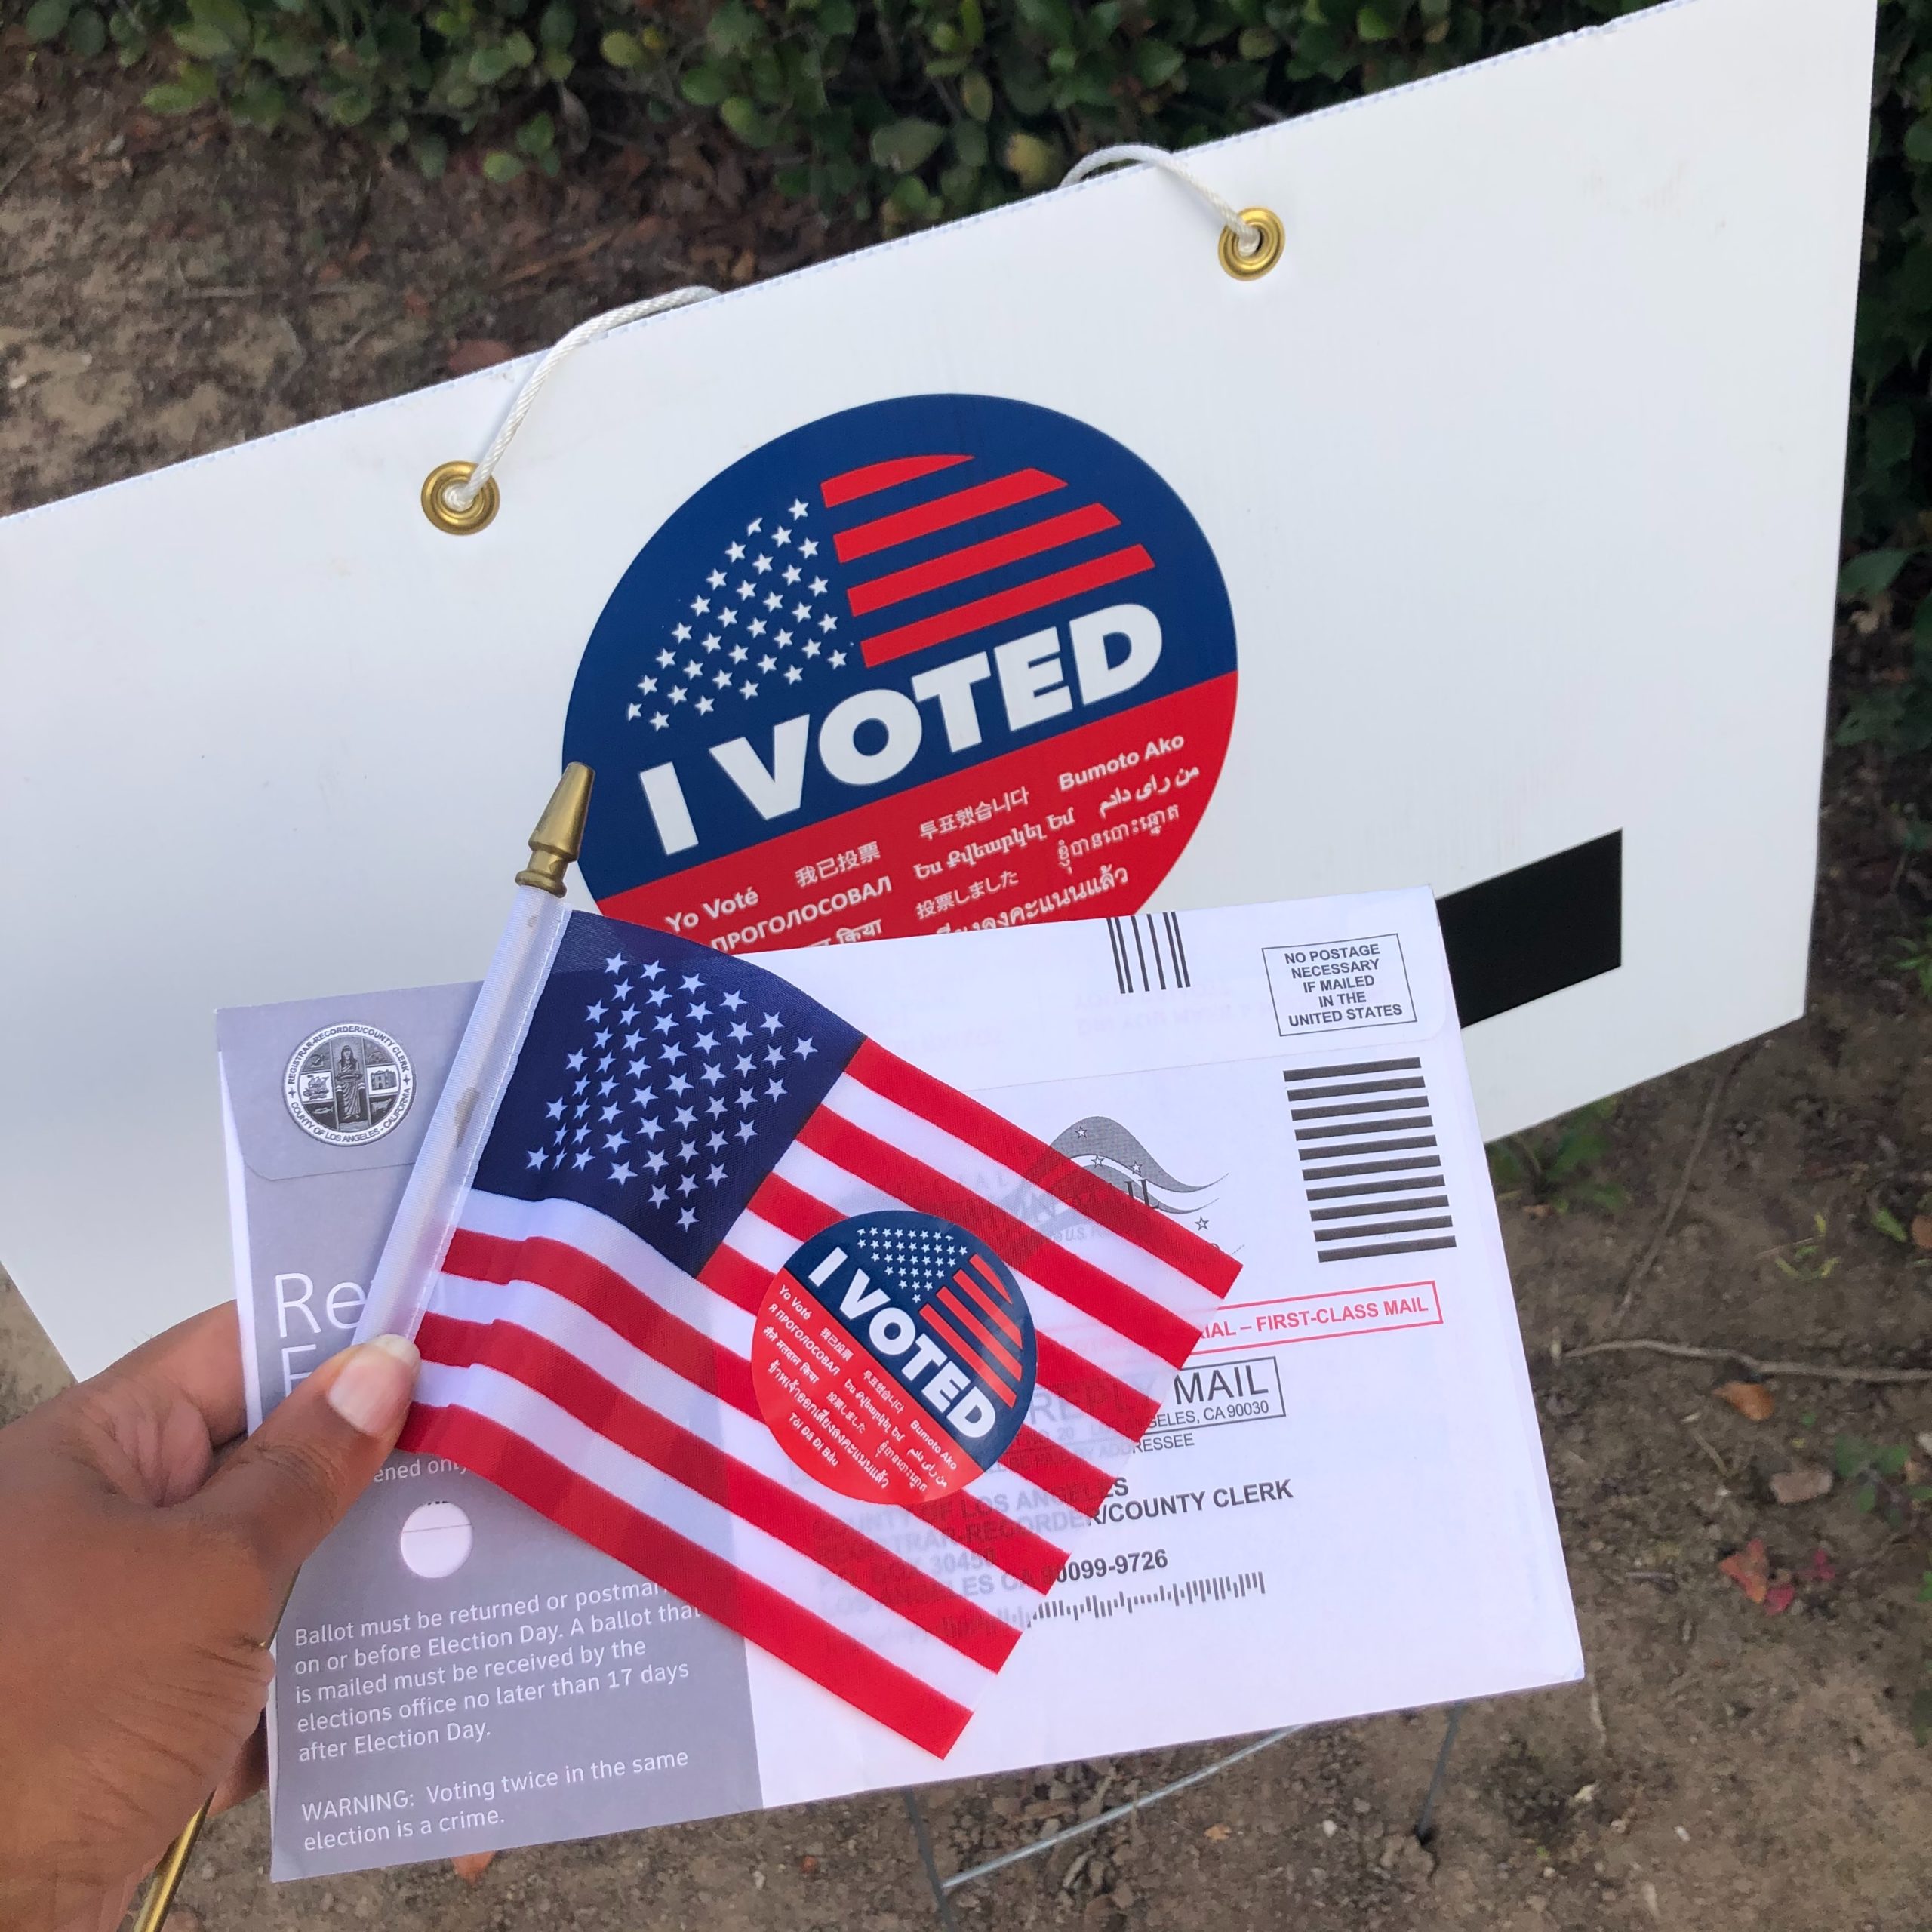 "I voted" sticker and sign with a mailed ballot and a small American flag